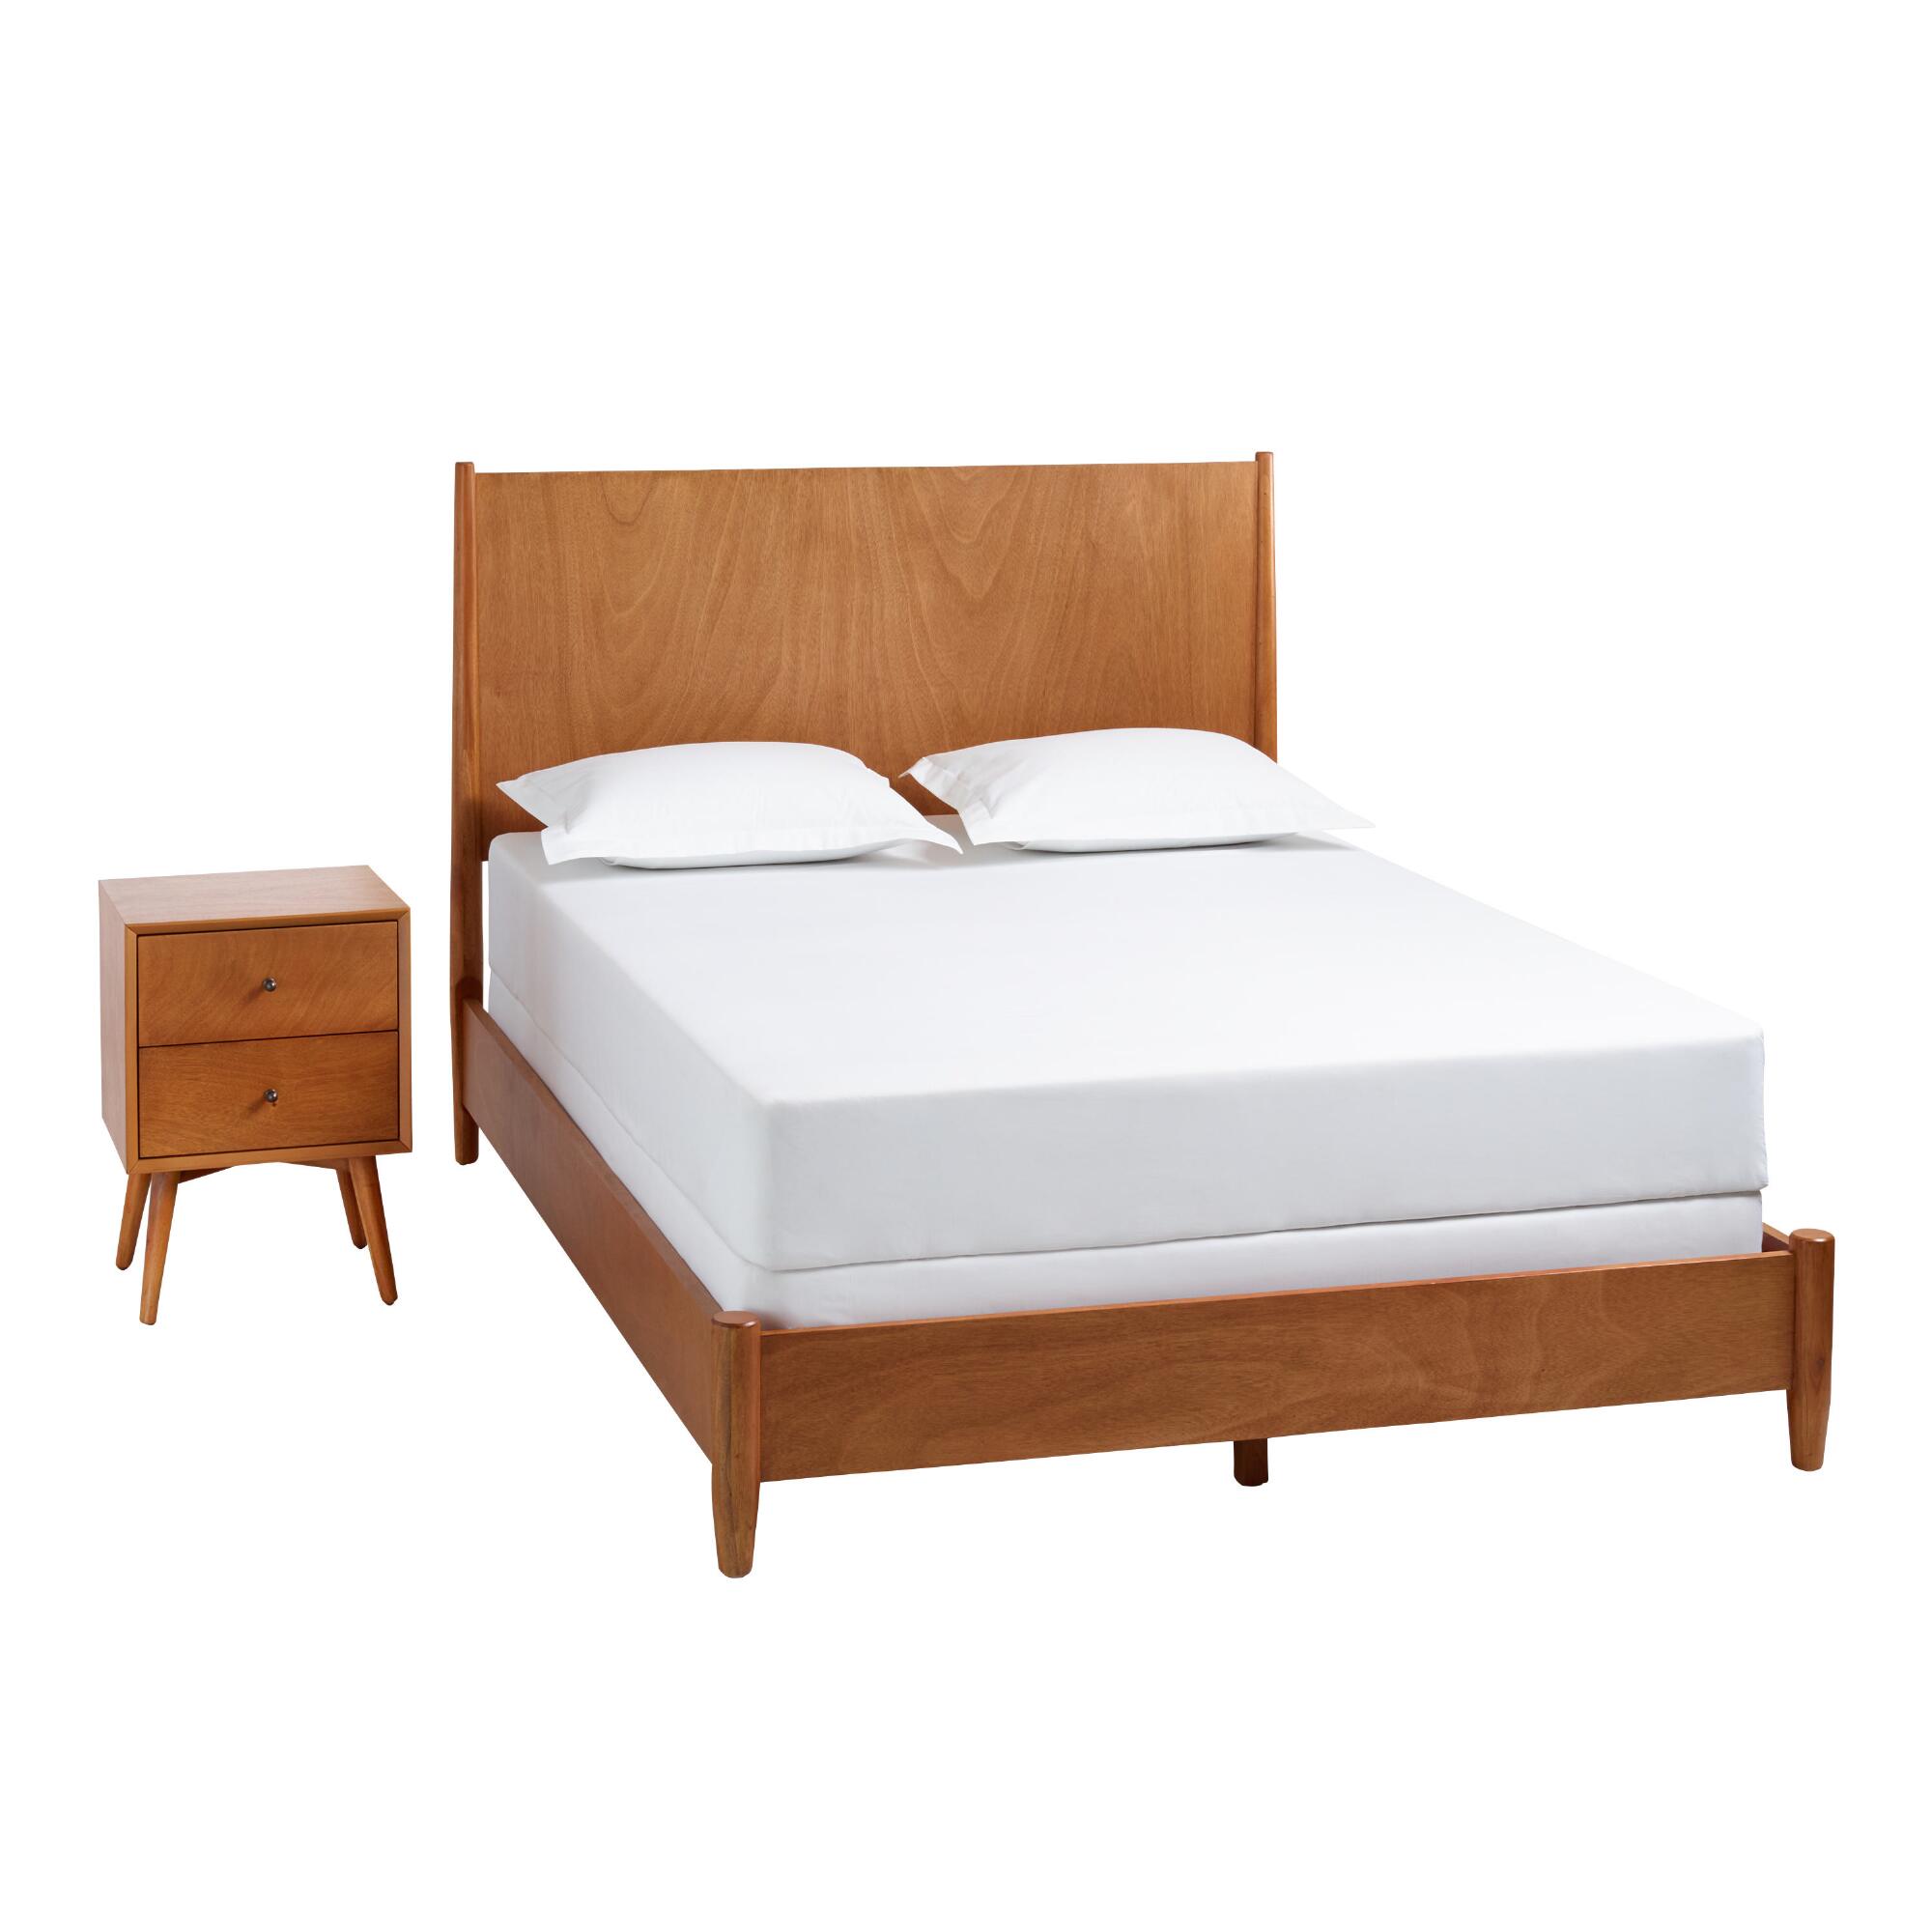 Acorn Wood Brewton Bedroom Collection by World Market